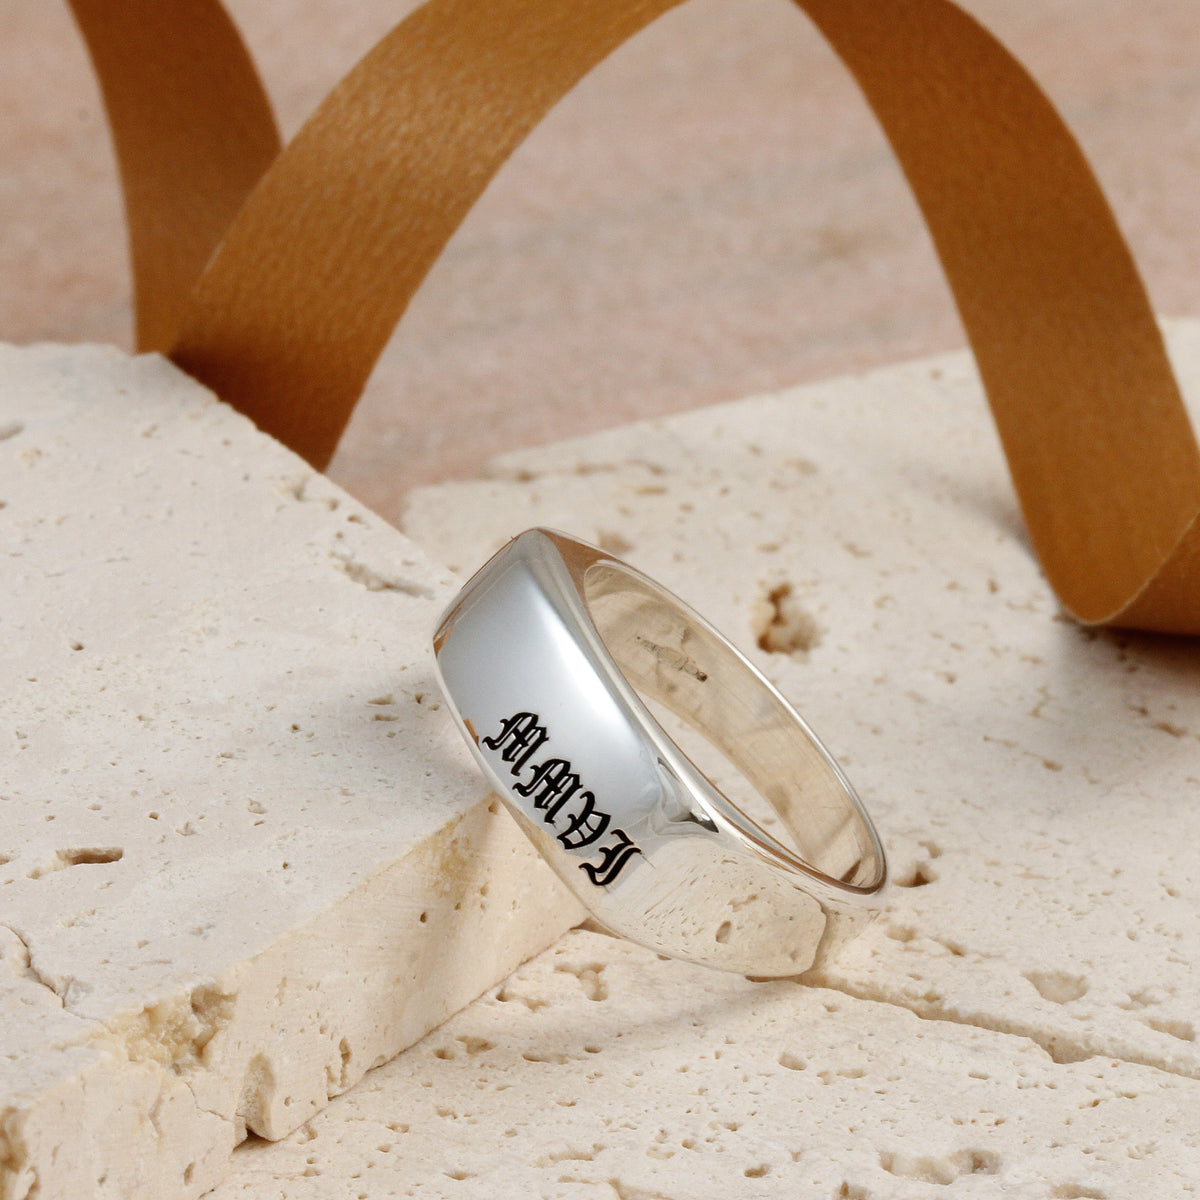 roman numerals engraving in olde english font on silver signet ring